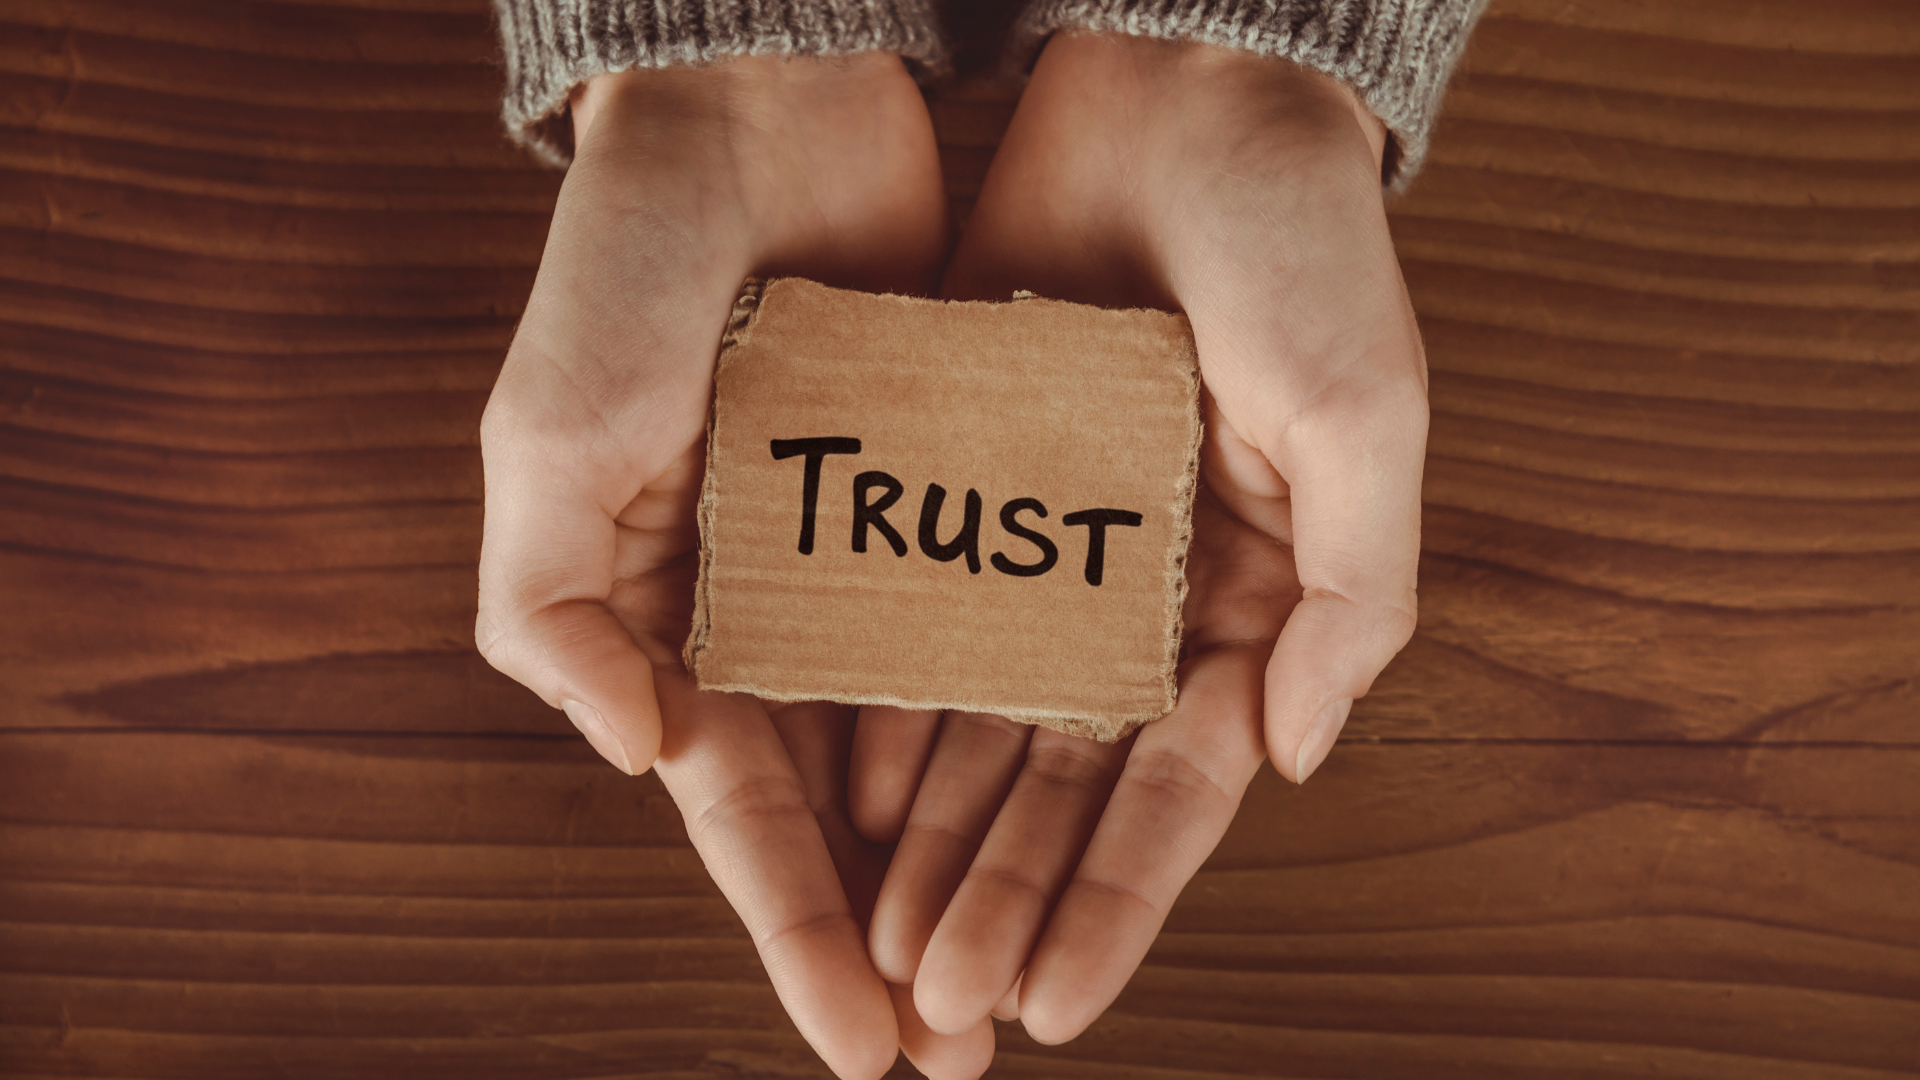 Does Your Staff Trust Its Leaders? Results May Surprise You